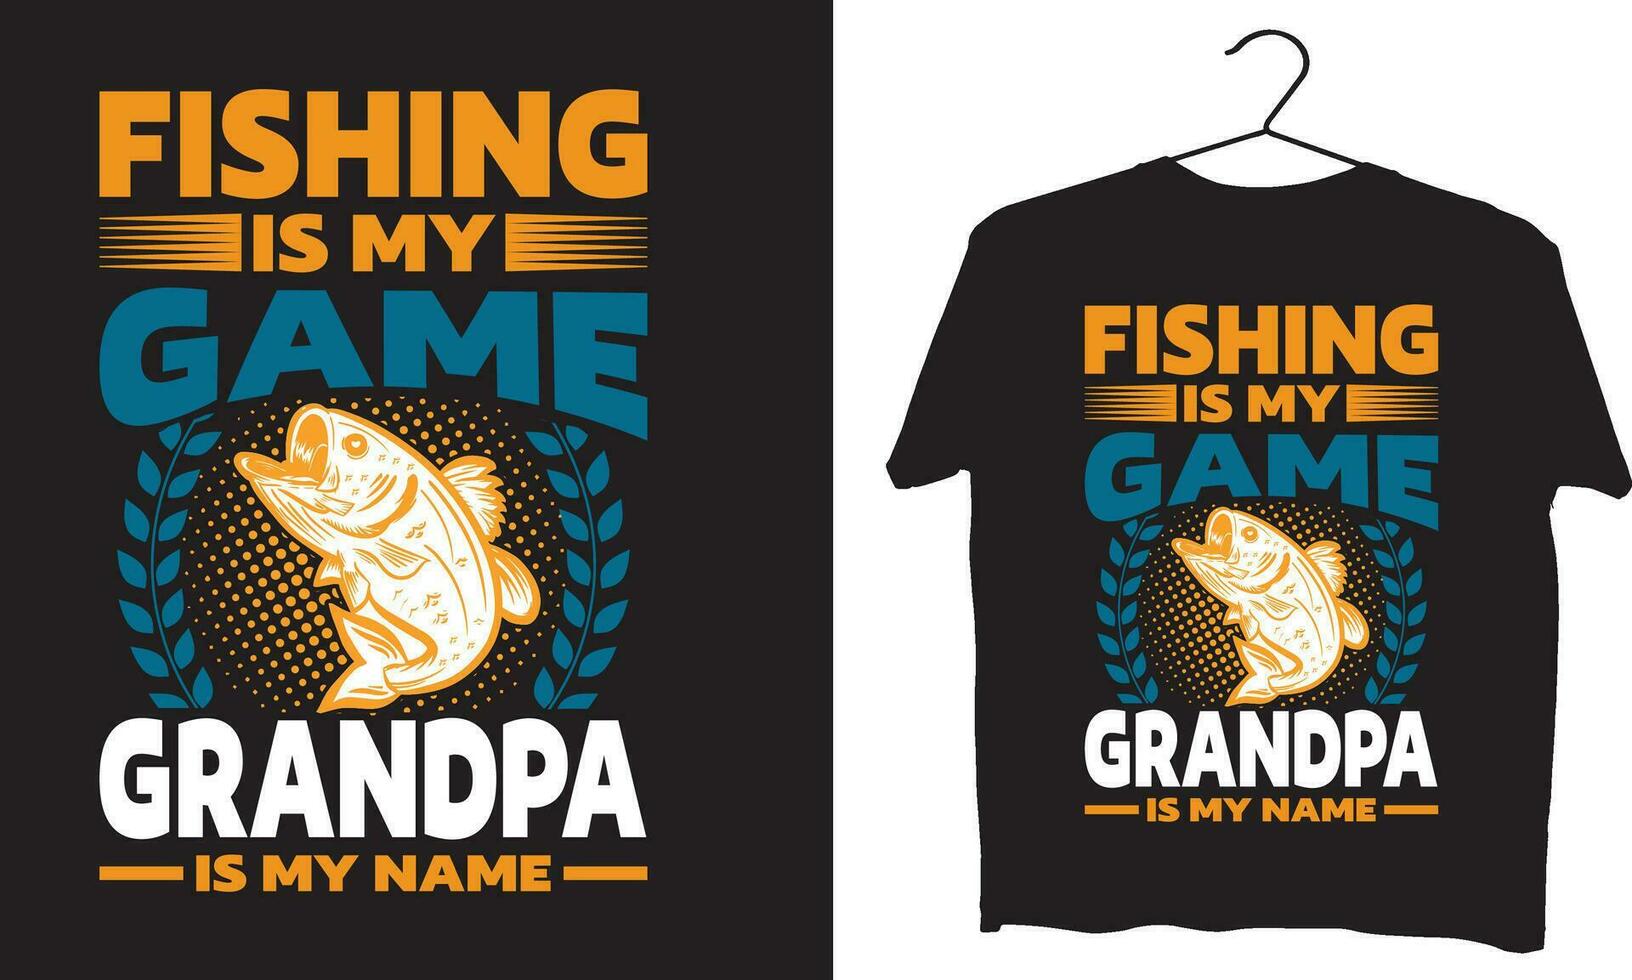 Fishing is my game grandpa is my name vector